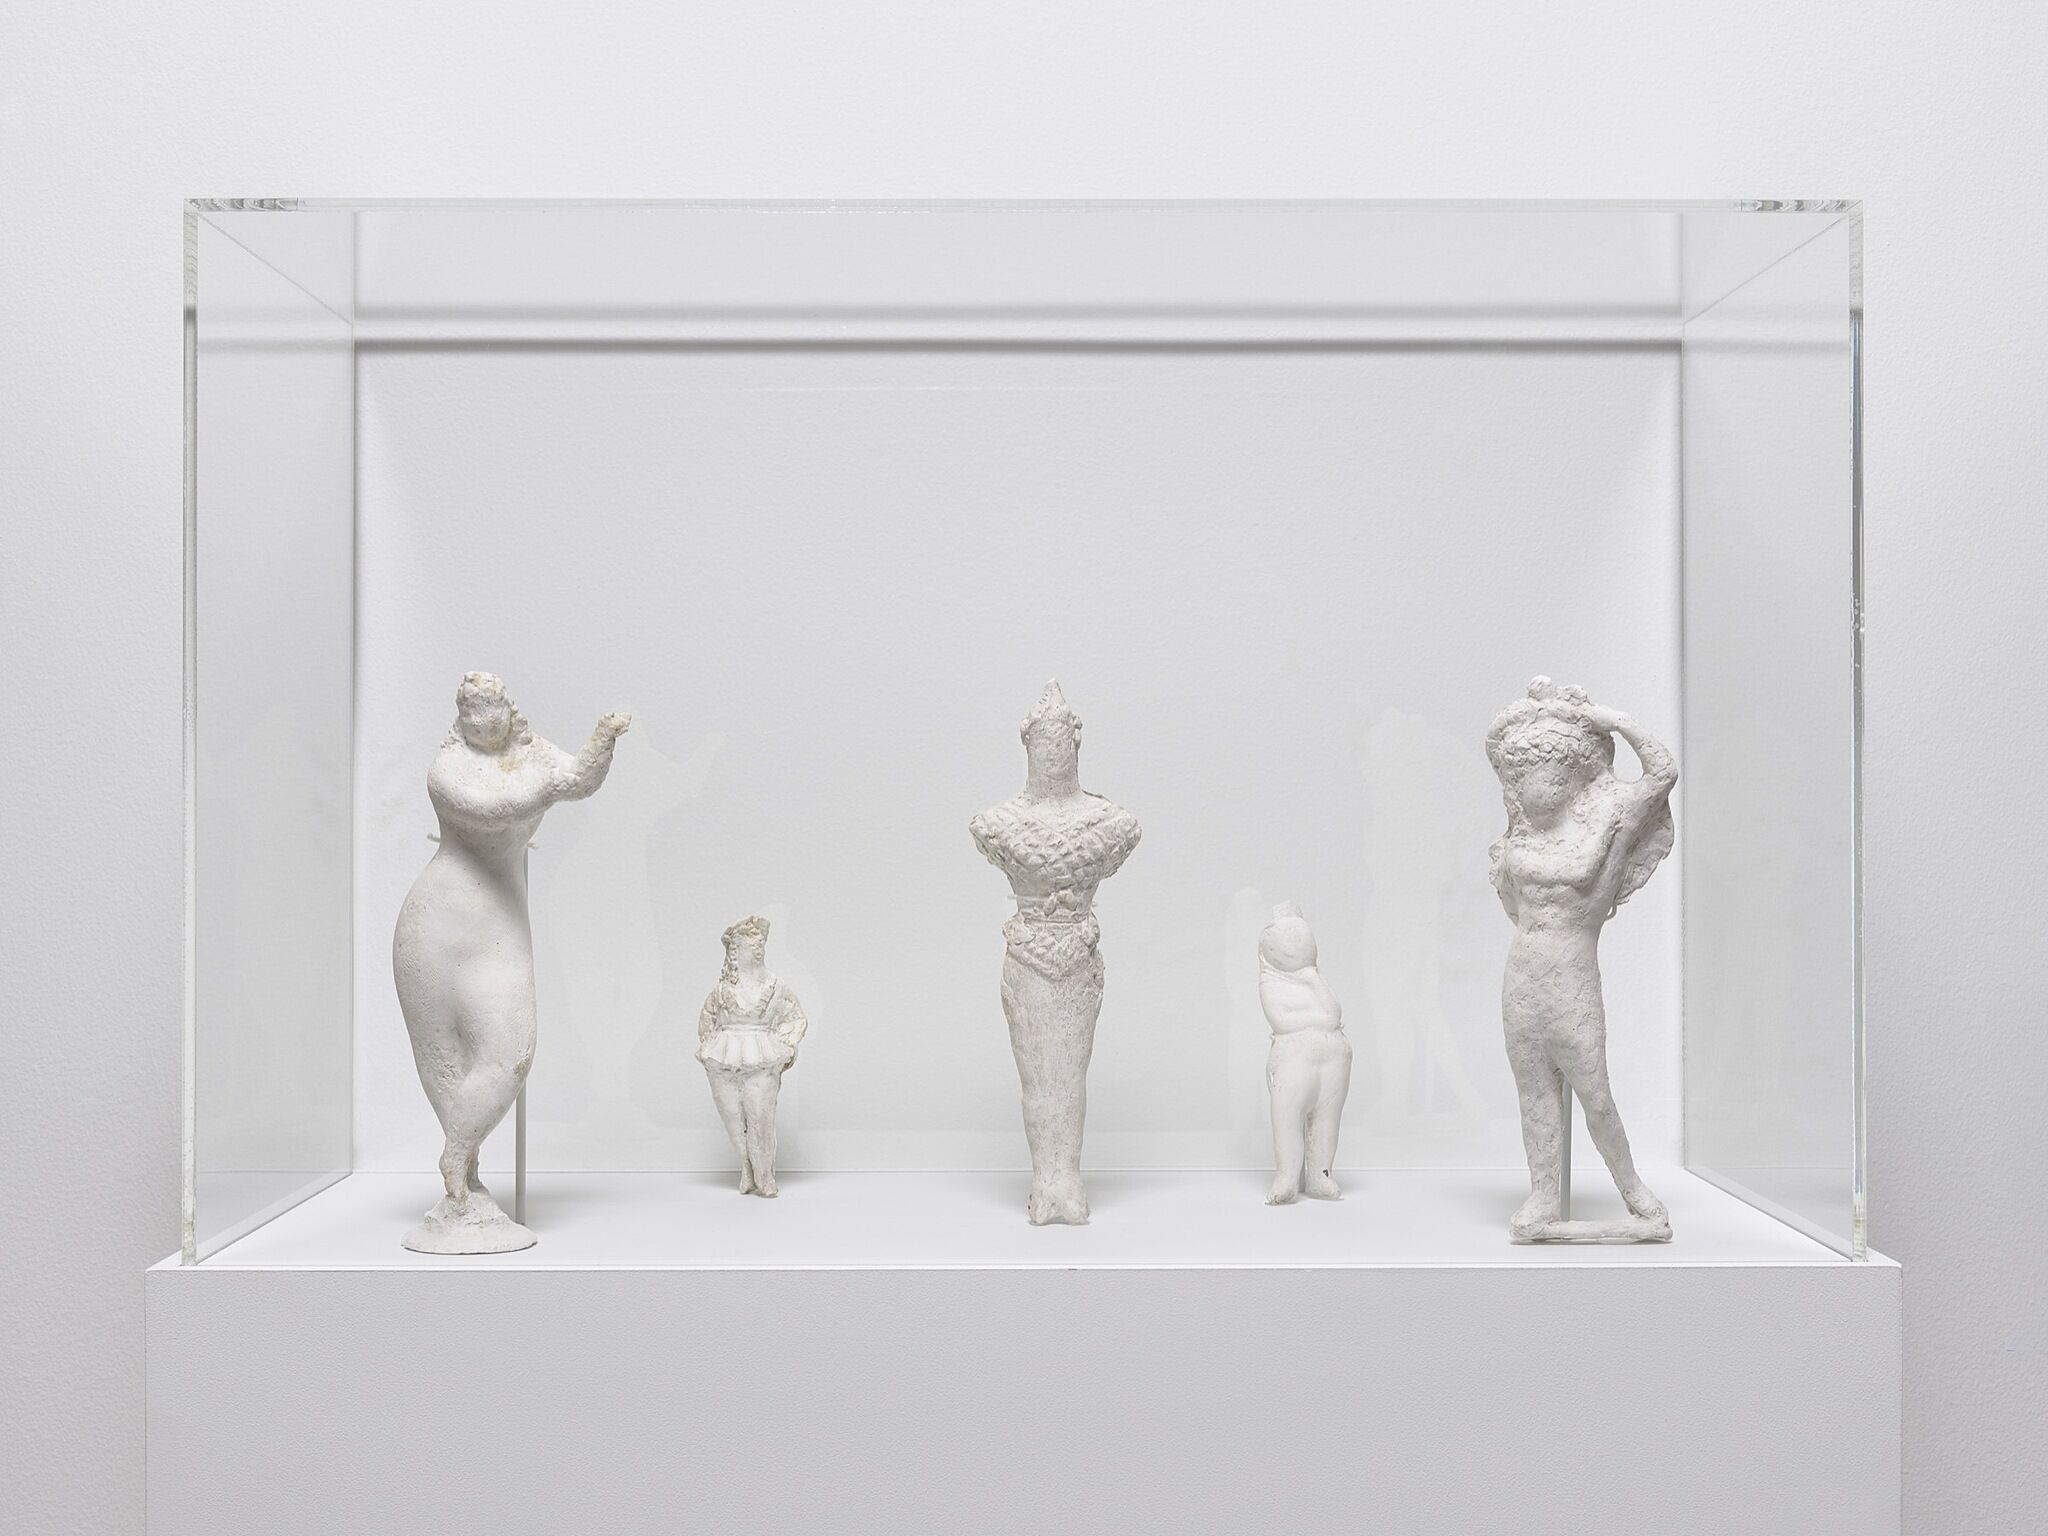 Five small white sculptures of figures.